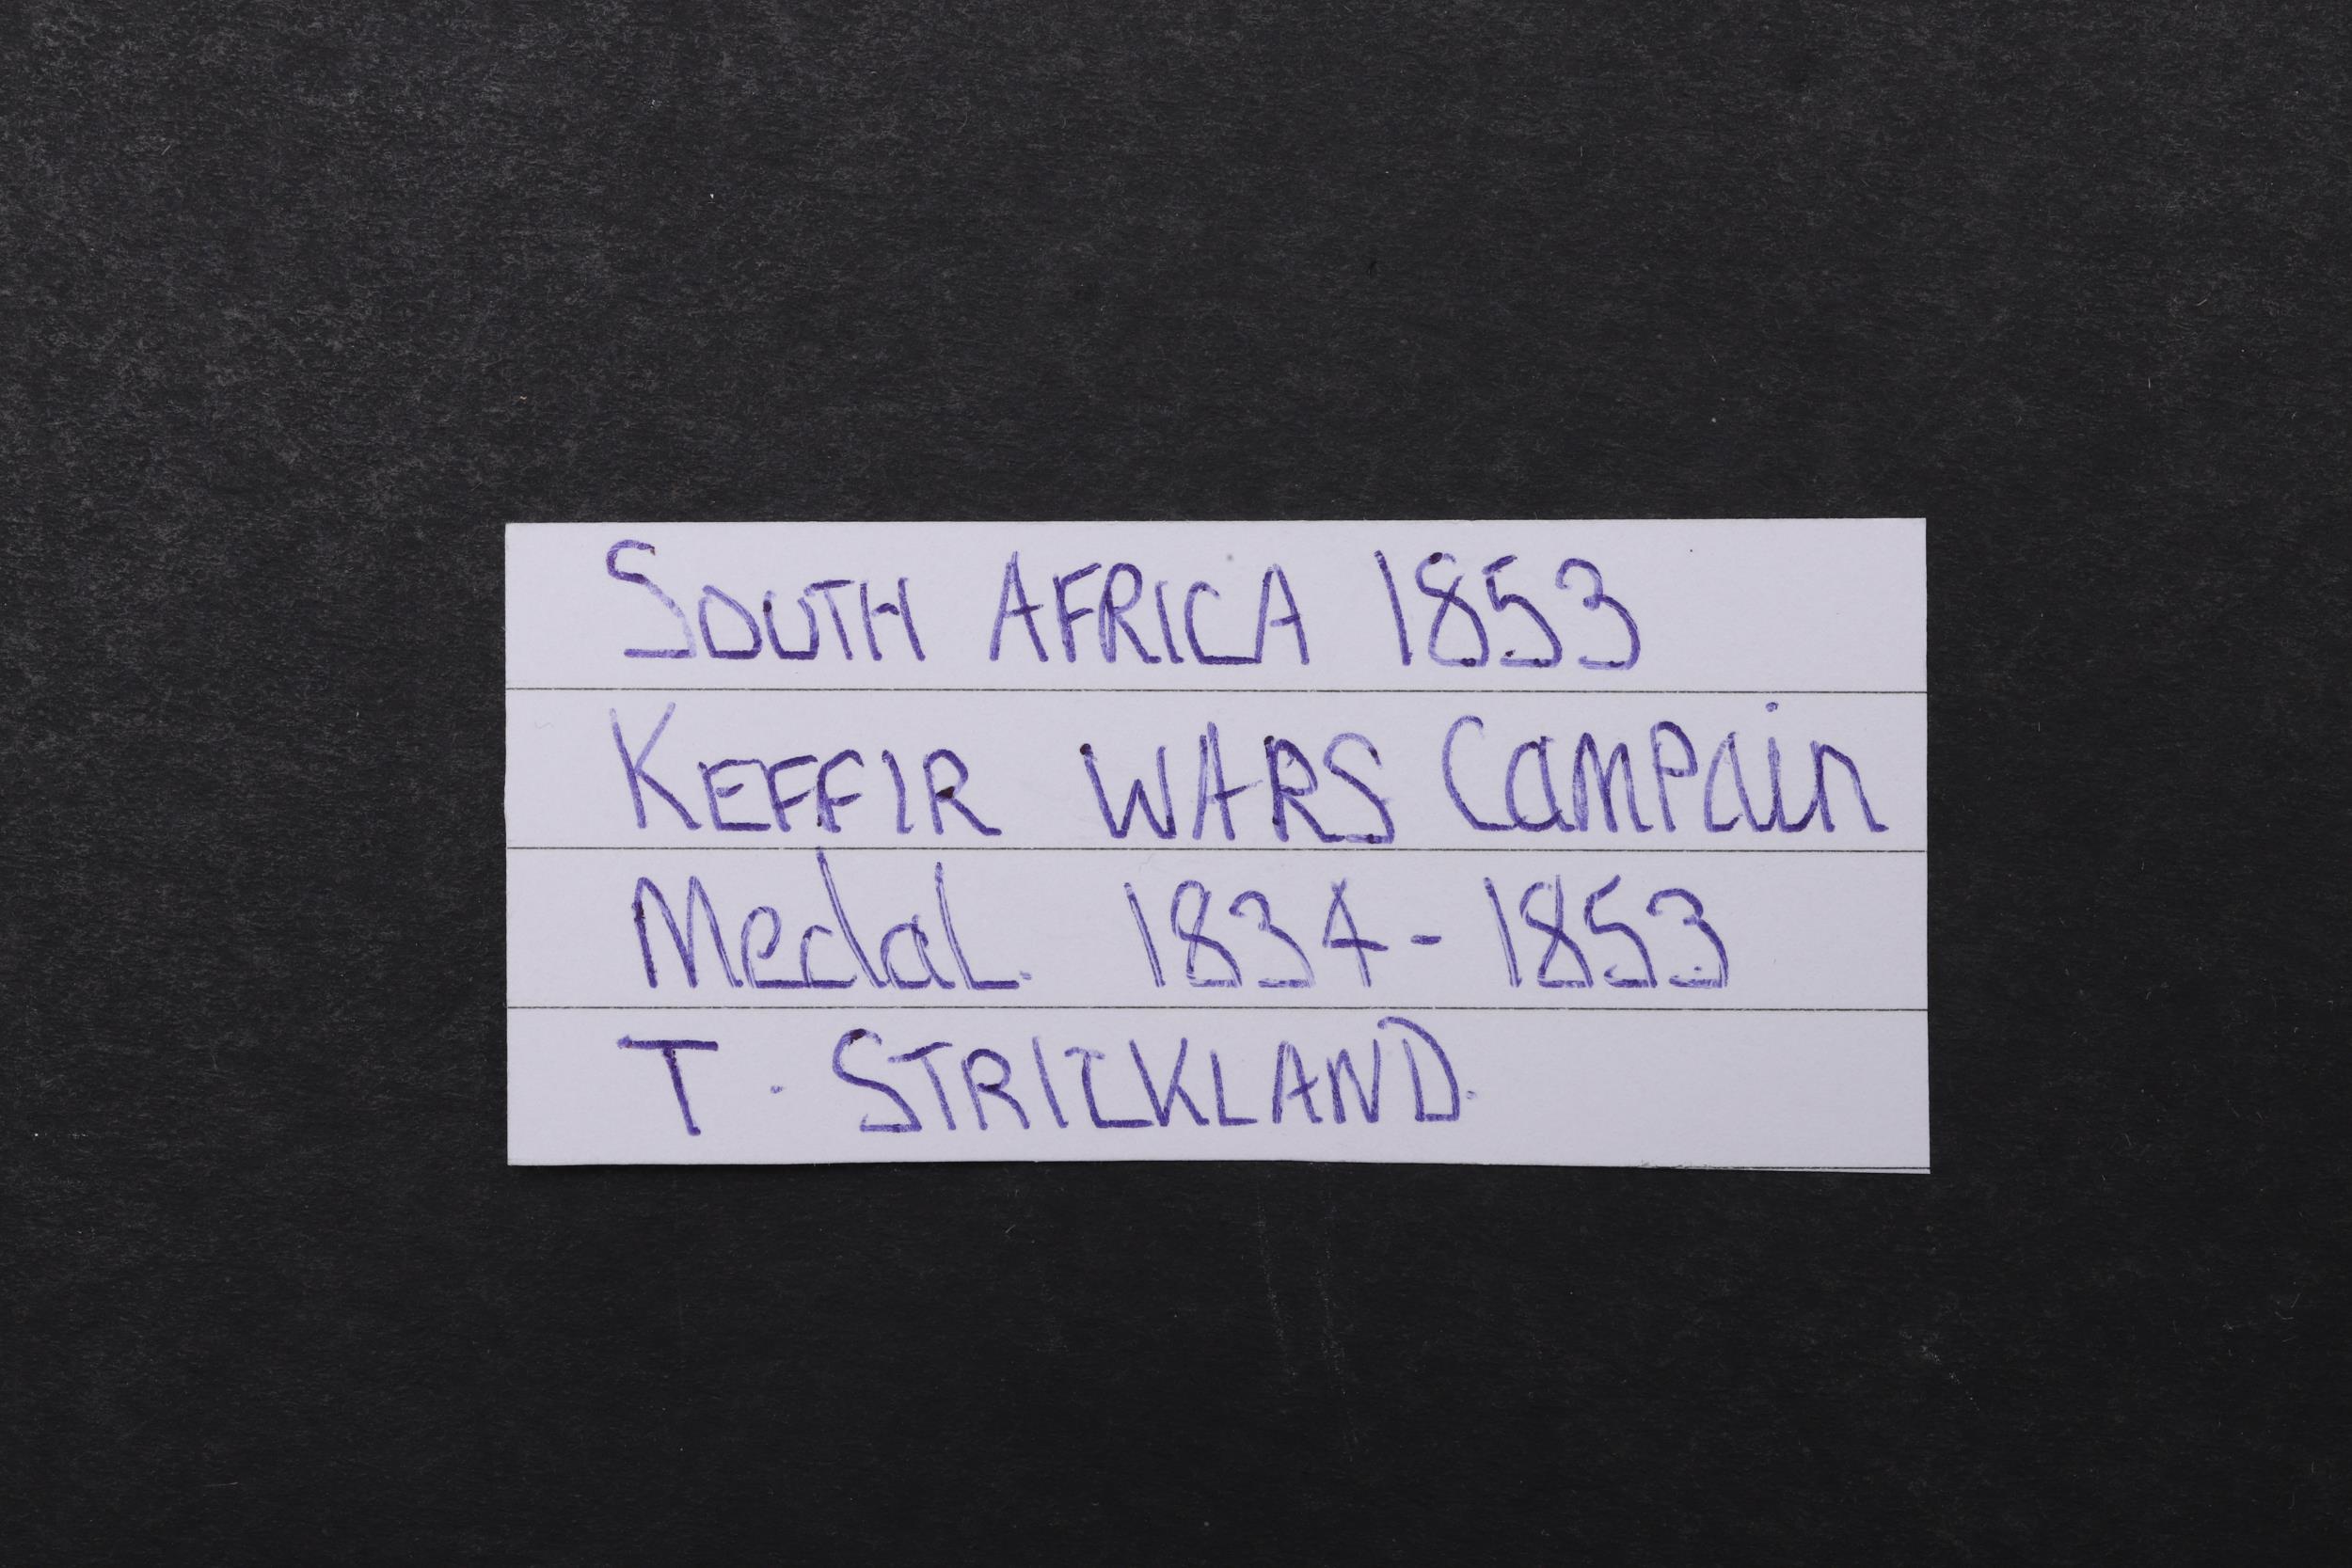 A SOUTH AFRICA 1853 MEDAL POSSIBLY TO DEPUTY ASST. COMMISSARY GENERAL STRICKLAND. - Bild 6 aus 6